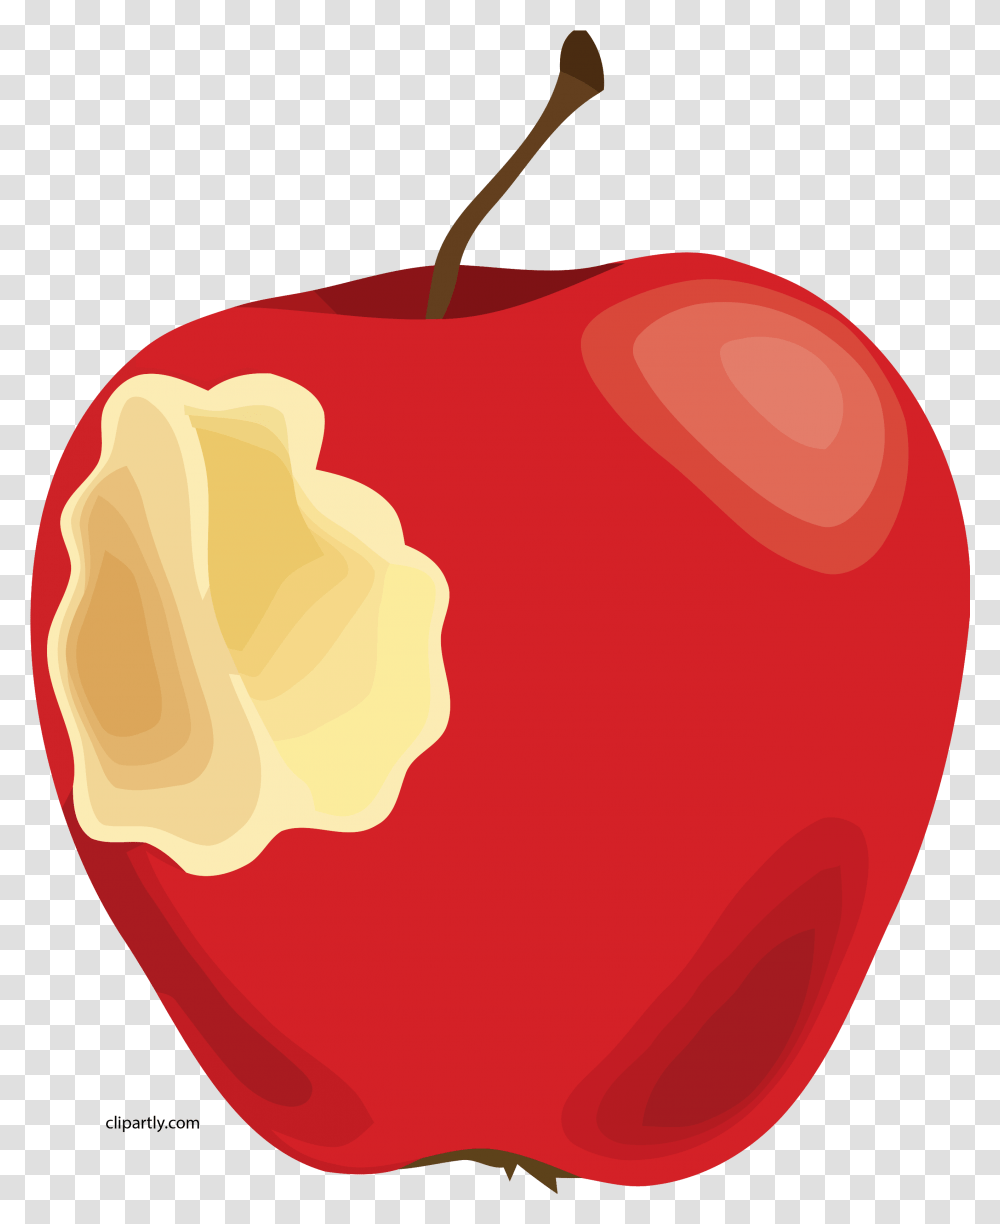 Apple With A Bite Out Of It Clipart Snow White Bitten Apple, Plant, Food, Vegetable, Pepper Transparent Png